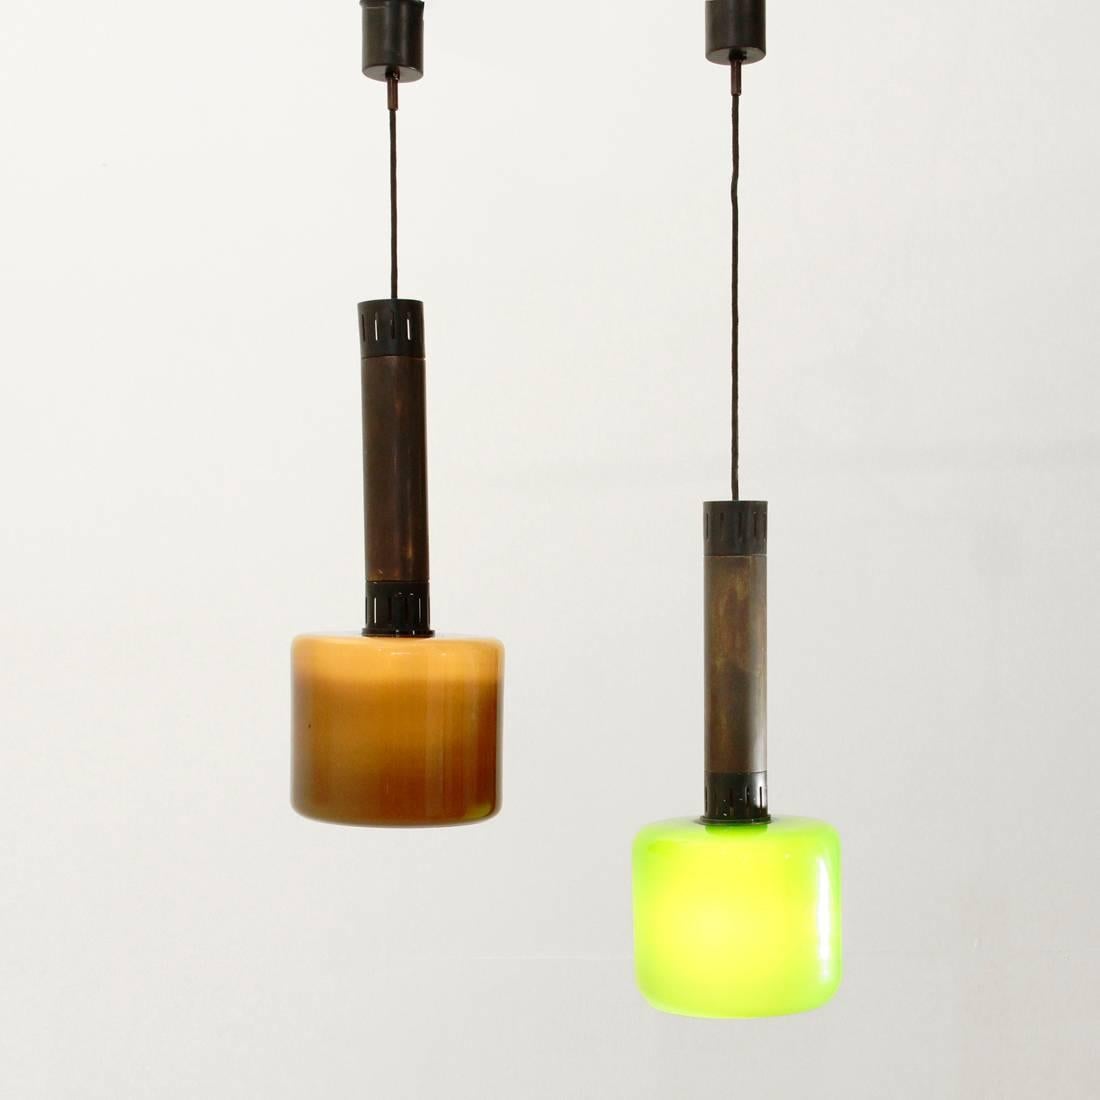 Italian lights from the 1950s in the style of Stilnovo
Ceiling lamps made of a brass tubular structure
Diffuser holder with side openings in black varnished metal
Black and green colored glass diffusers
Ceiling cup in black varnished